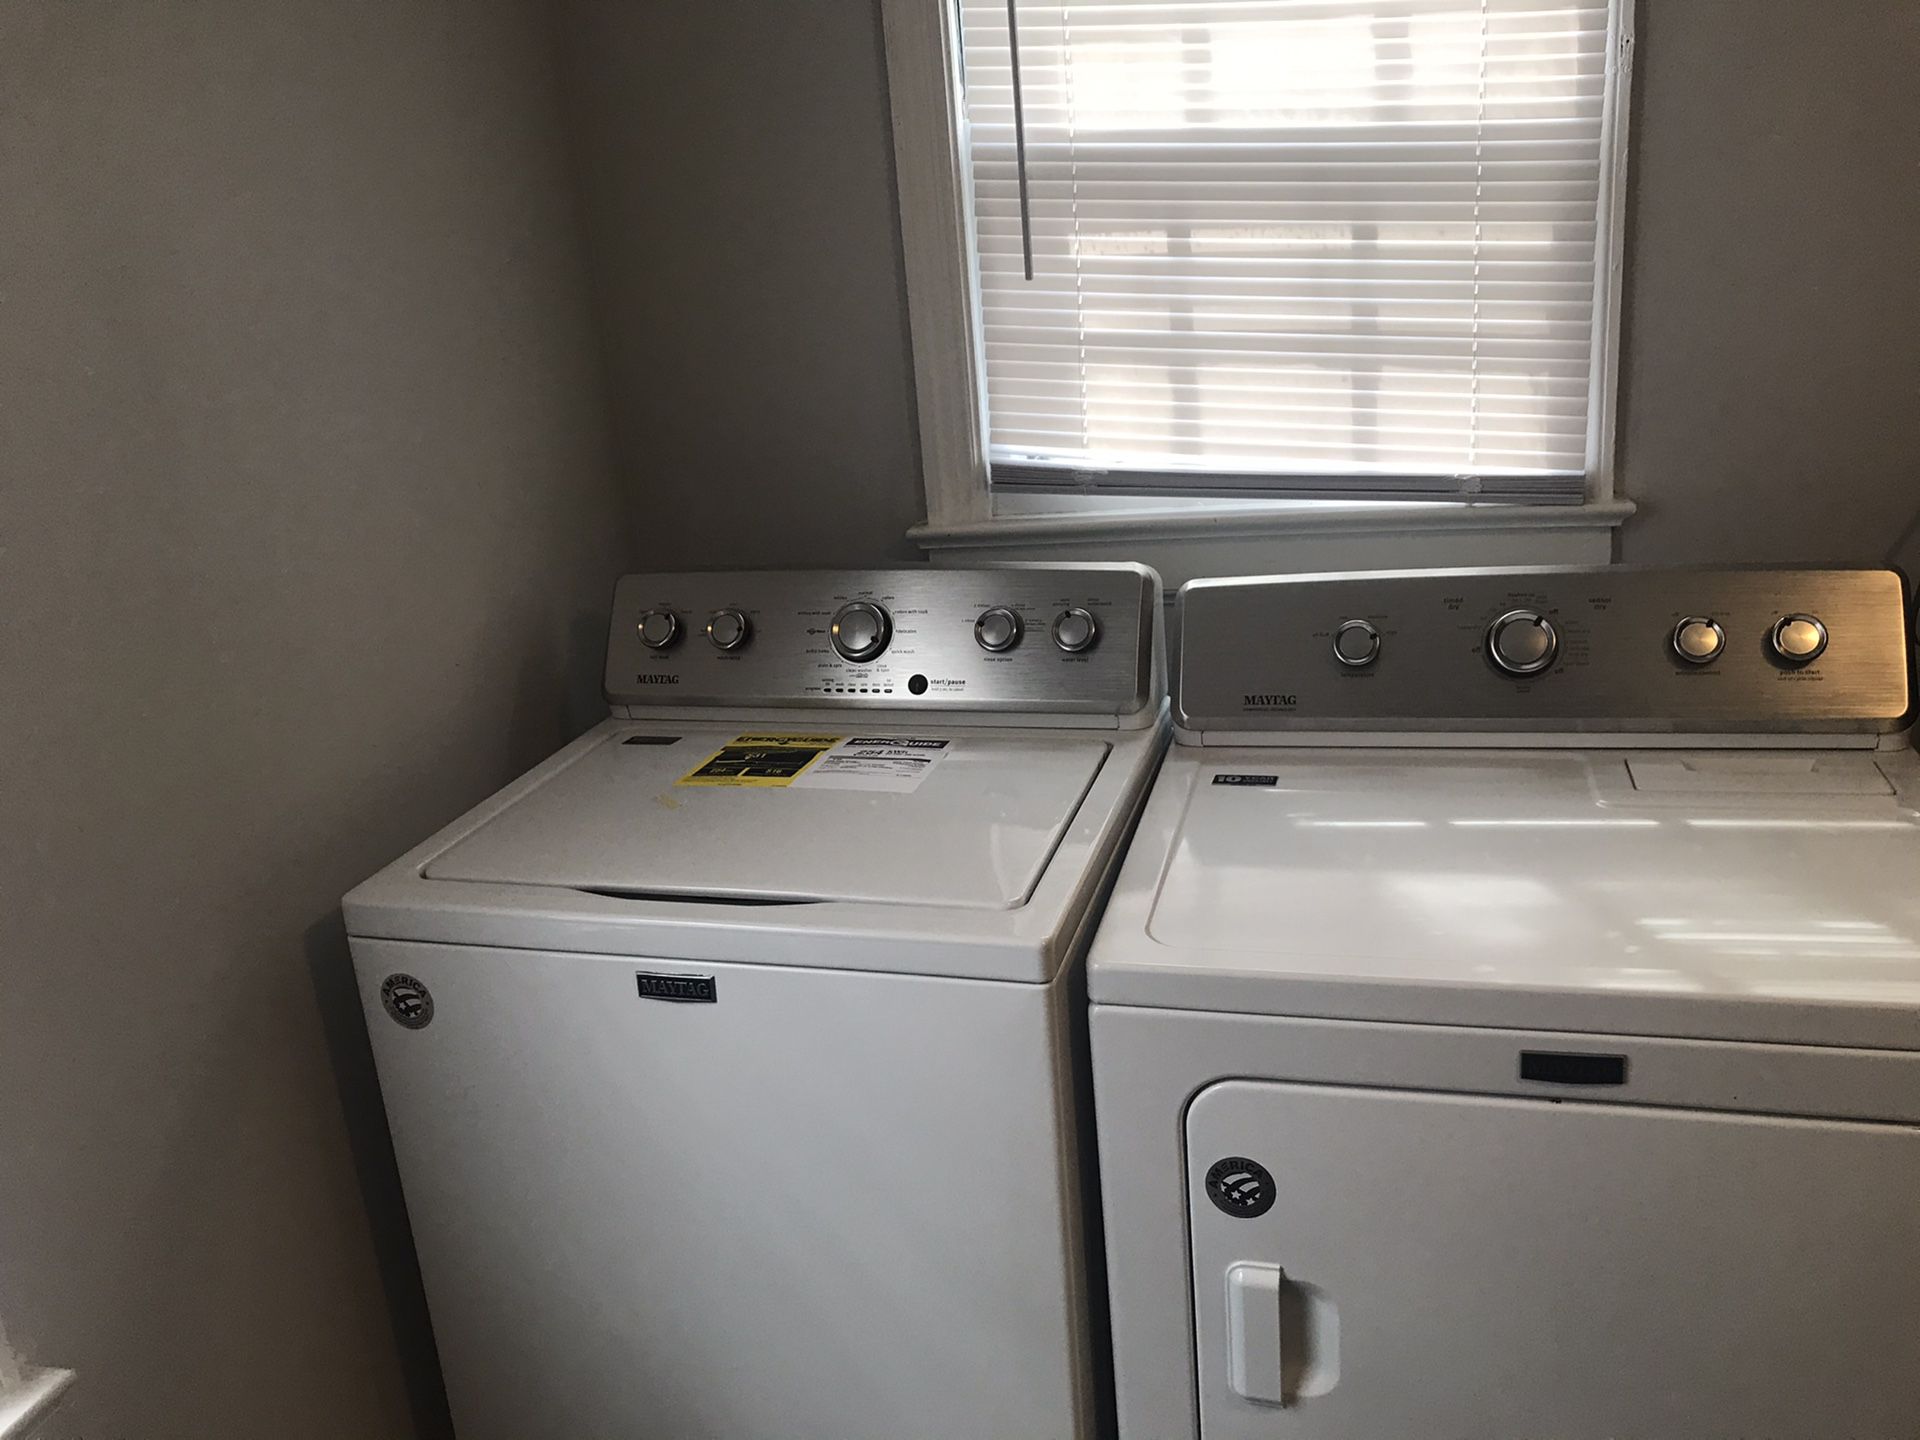 Brand new washer and dryer! $250 each